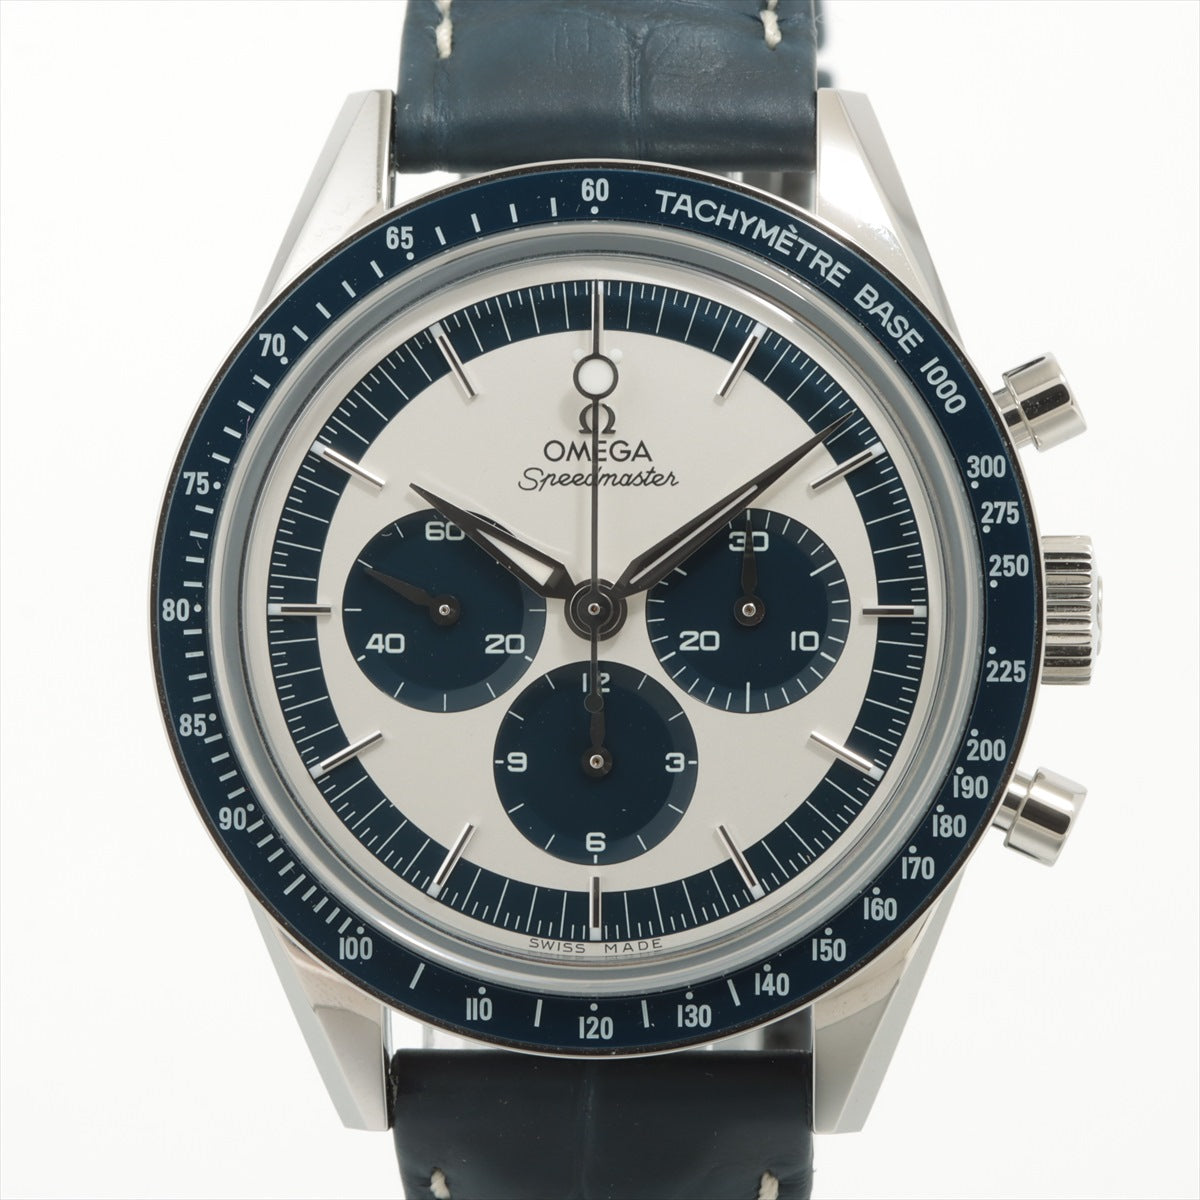 Omega Speedmaster Moonwatch CK2998 Limited to 2998 books worldwide 311.33.40.30.02.001 SS & leather Stem-winder Silver-Face